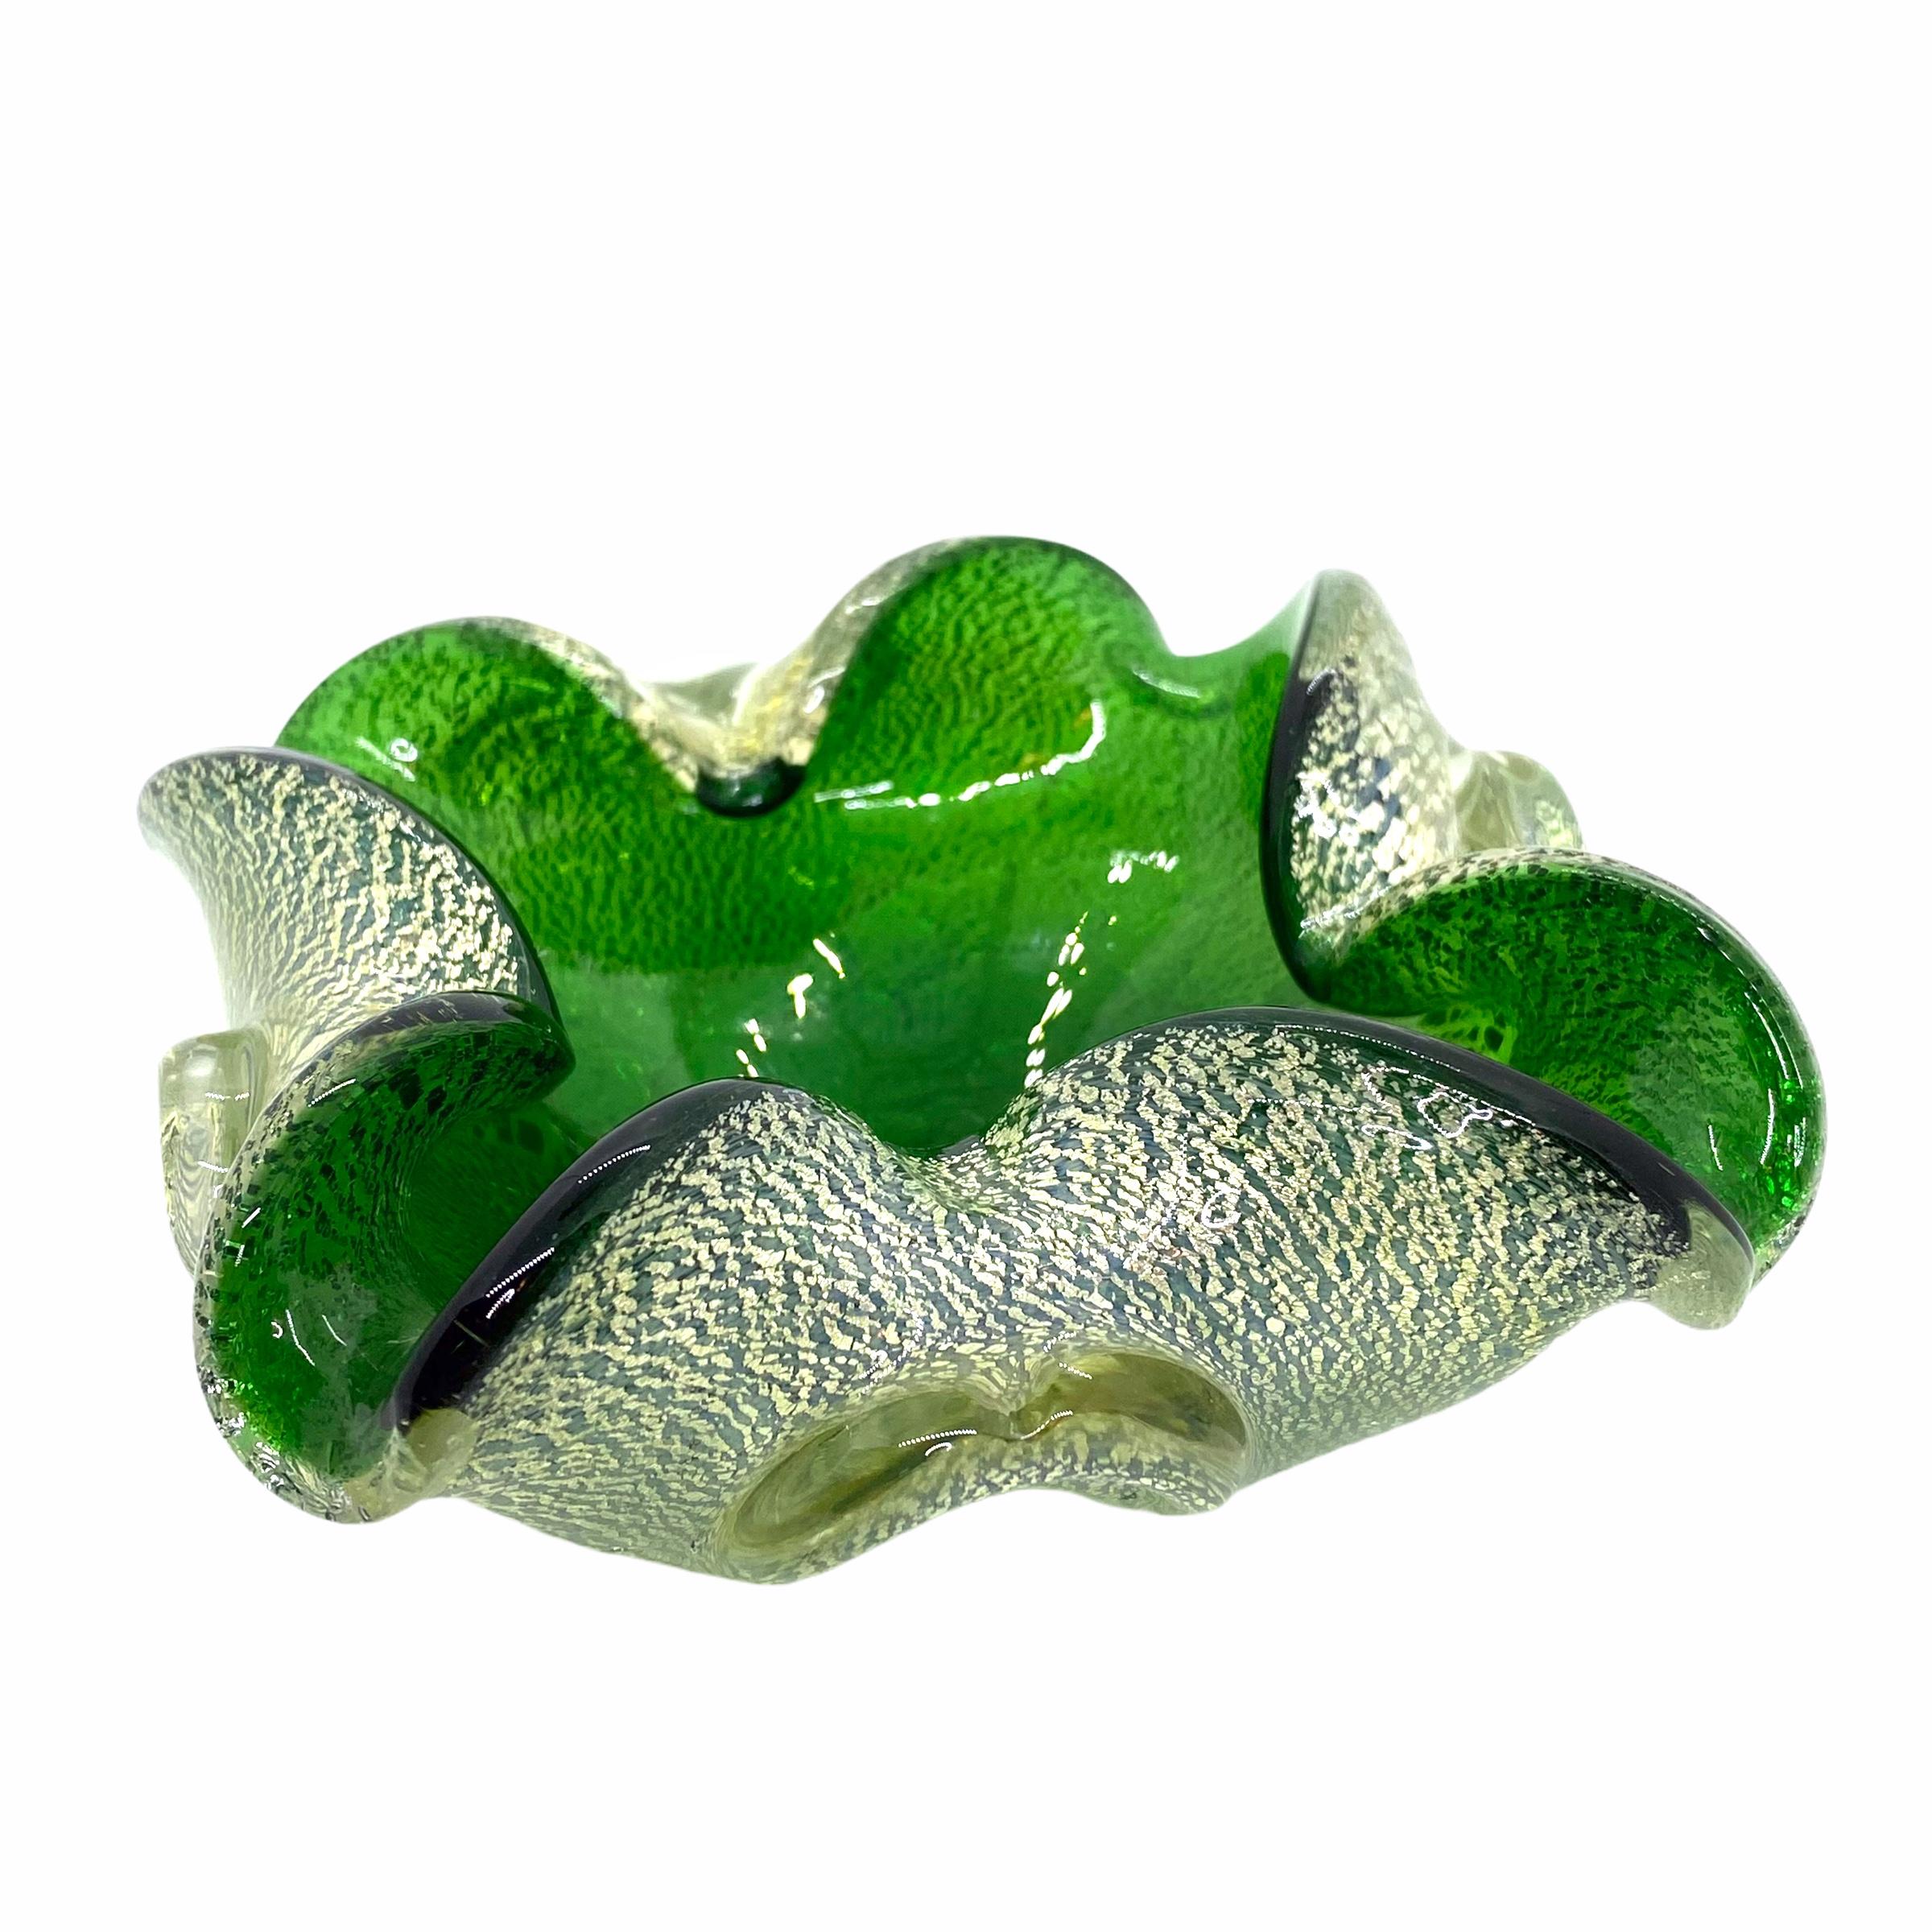 Mid-Century Modern Petite Murano Art Glass Bowl or Catchall by Barovier Toso, 1950s, Venice, Italy For Sale